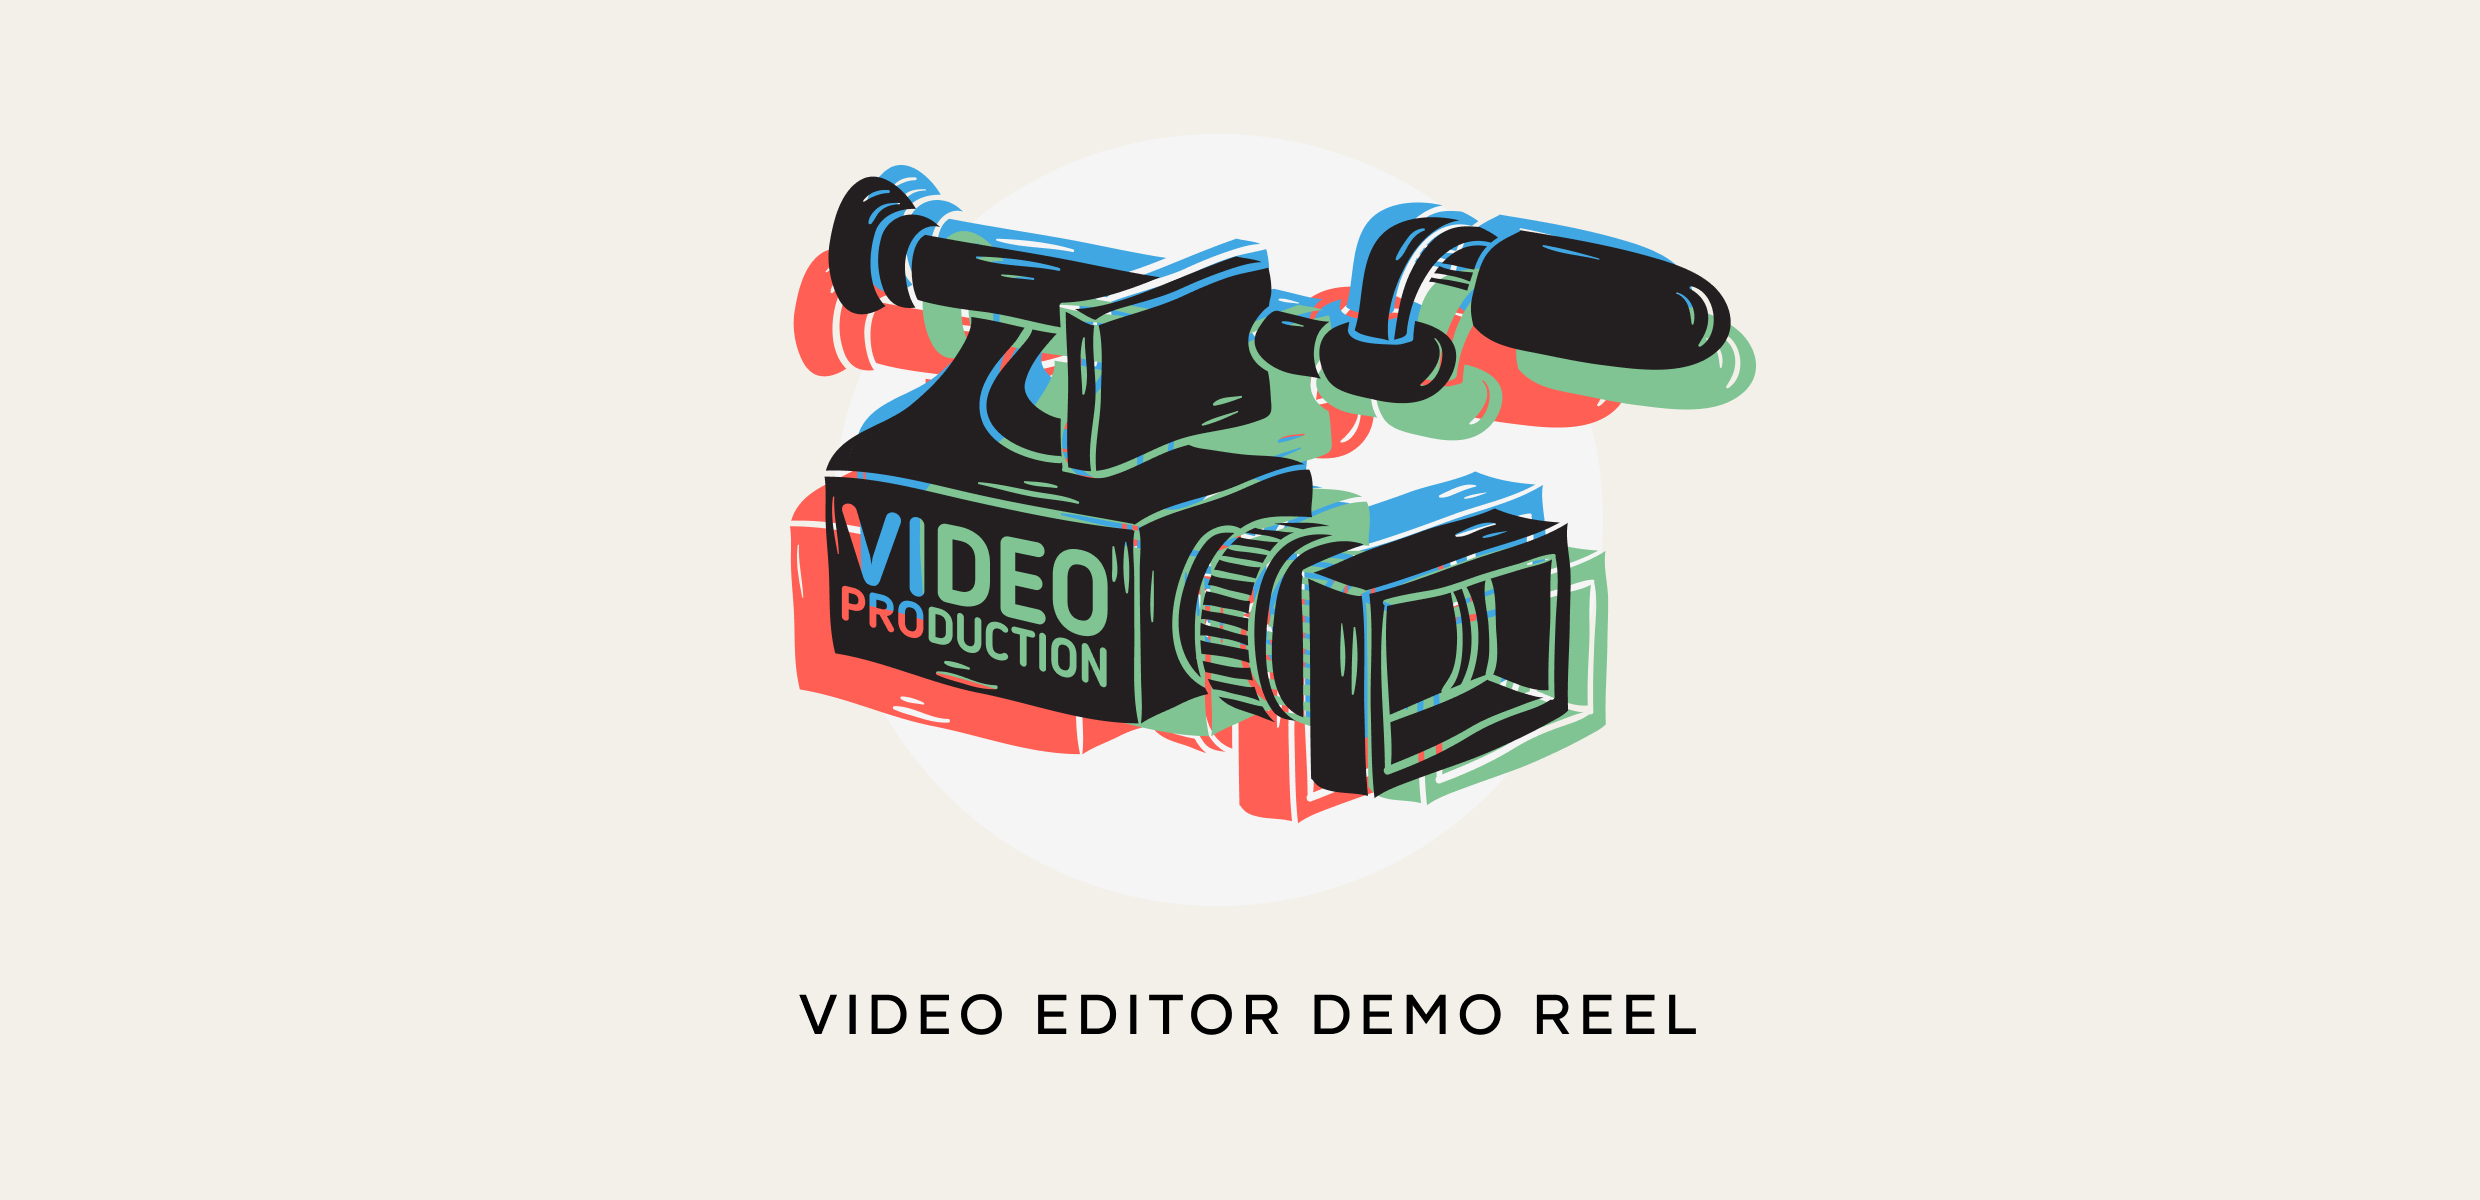 10 Tips To Make A Great Video Editor Demo Reel - Motion Array